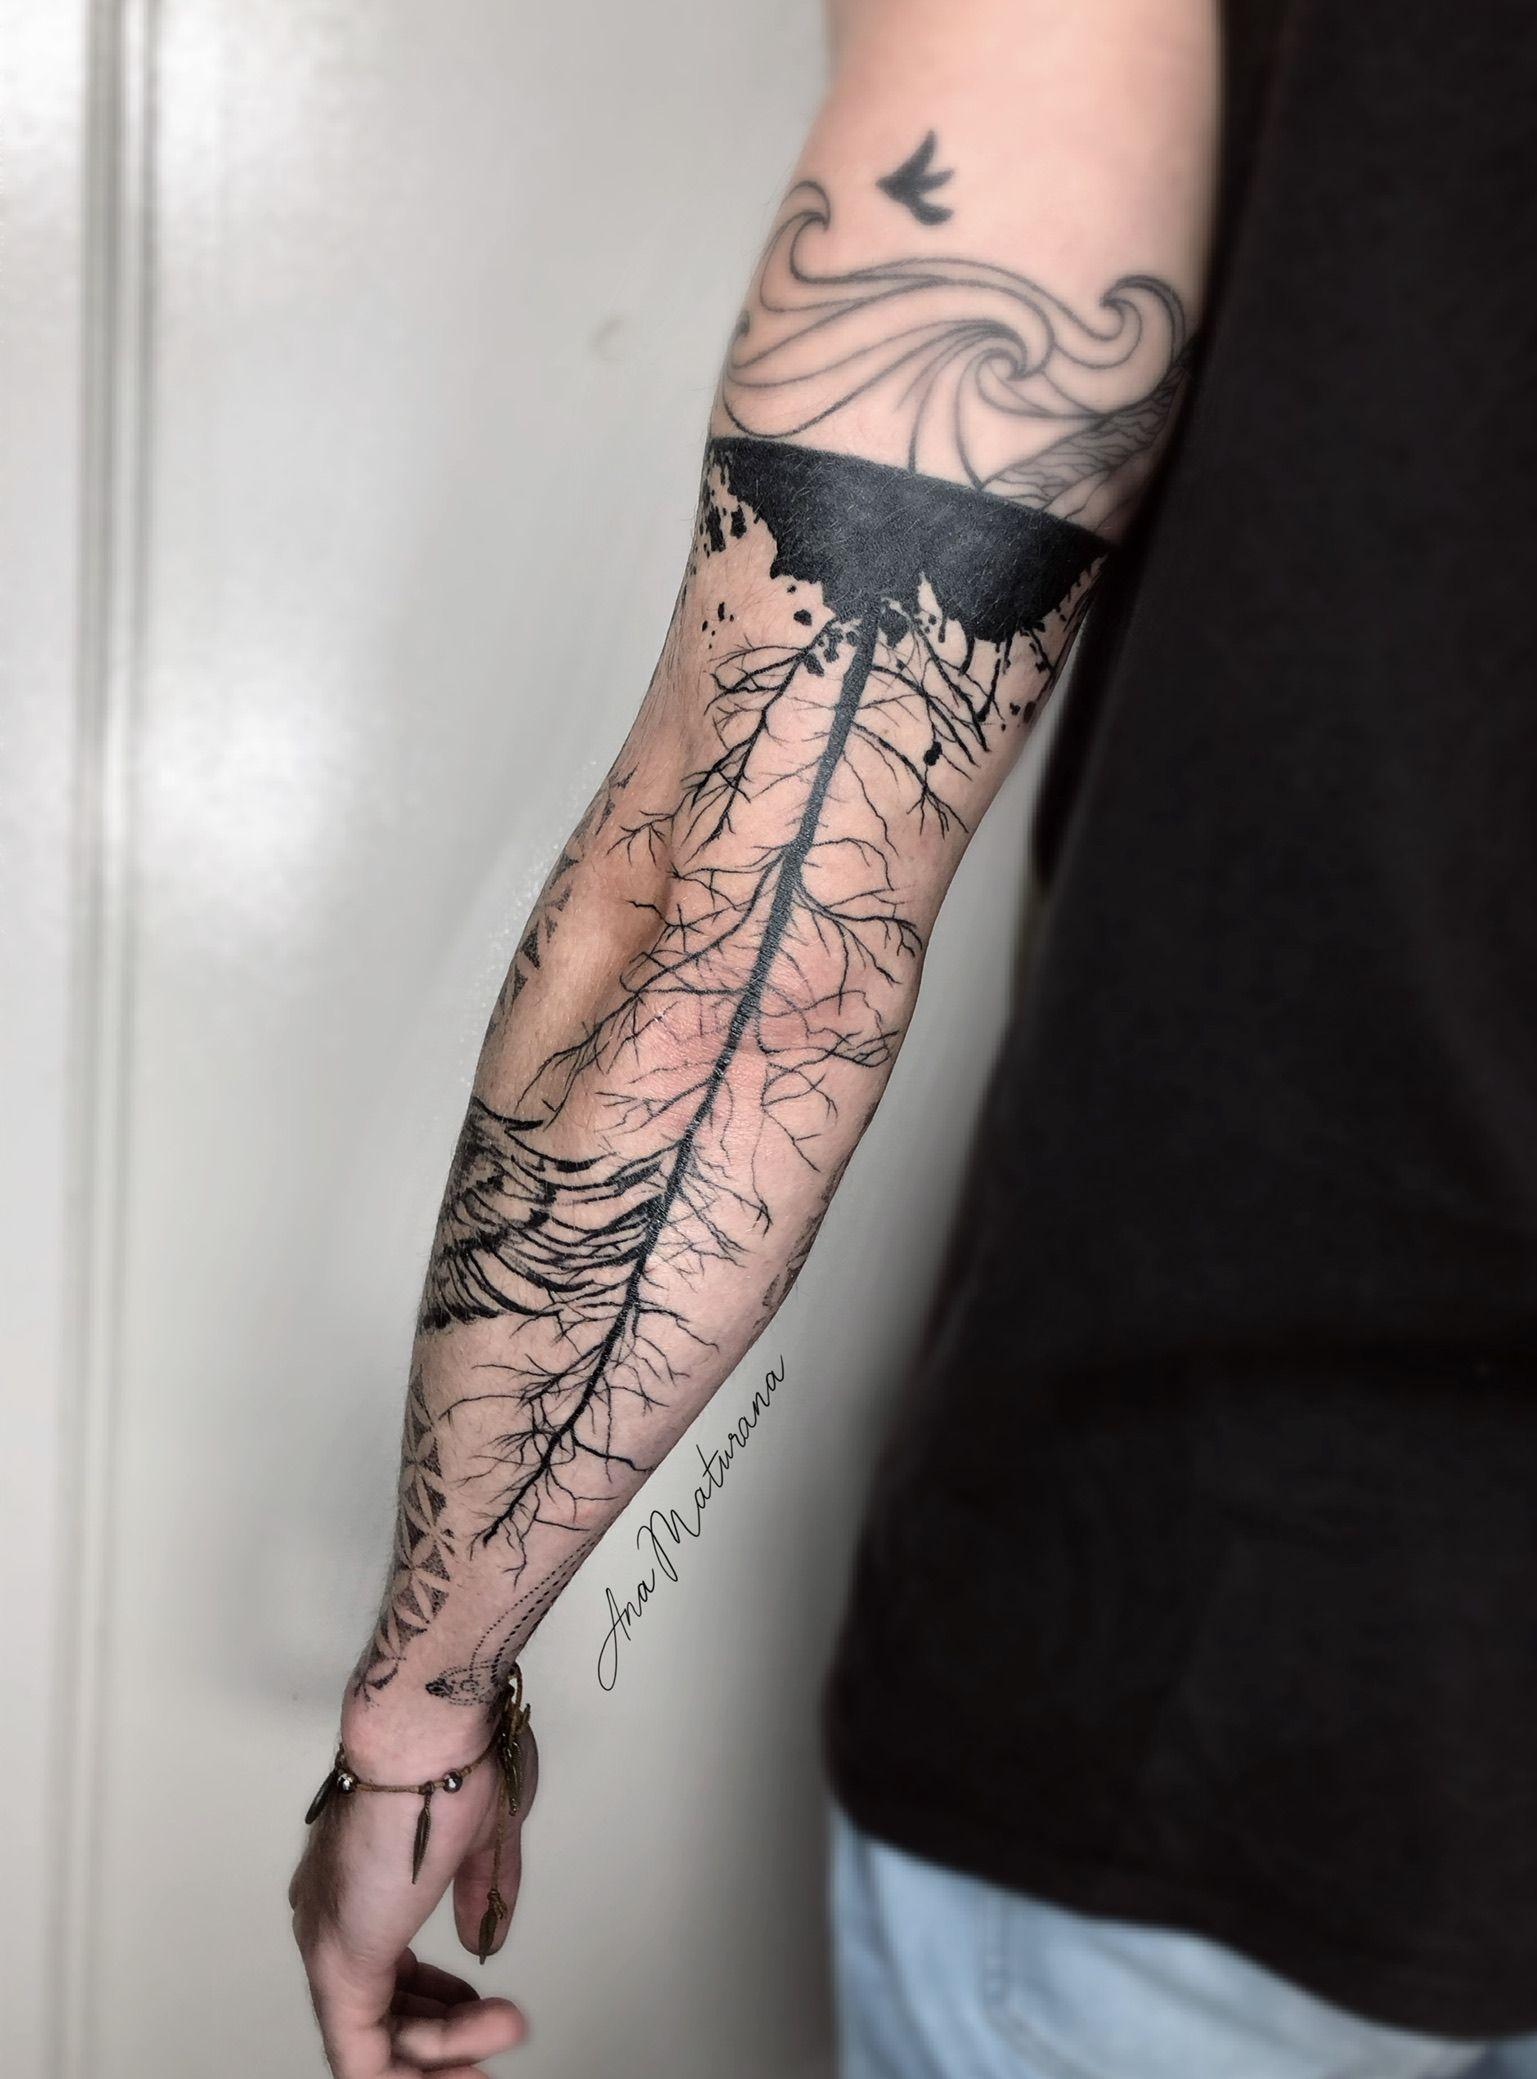 Best Tattoo Artist In Town/ Surrounding area for nature style tattoo?  Looking to get those specific tattoos pictured. : r/asheville